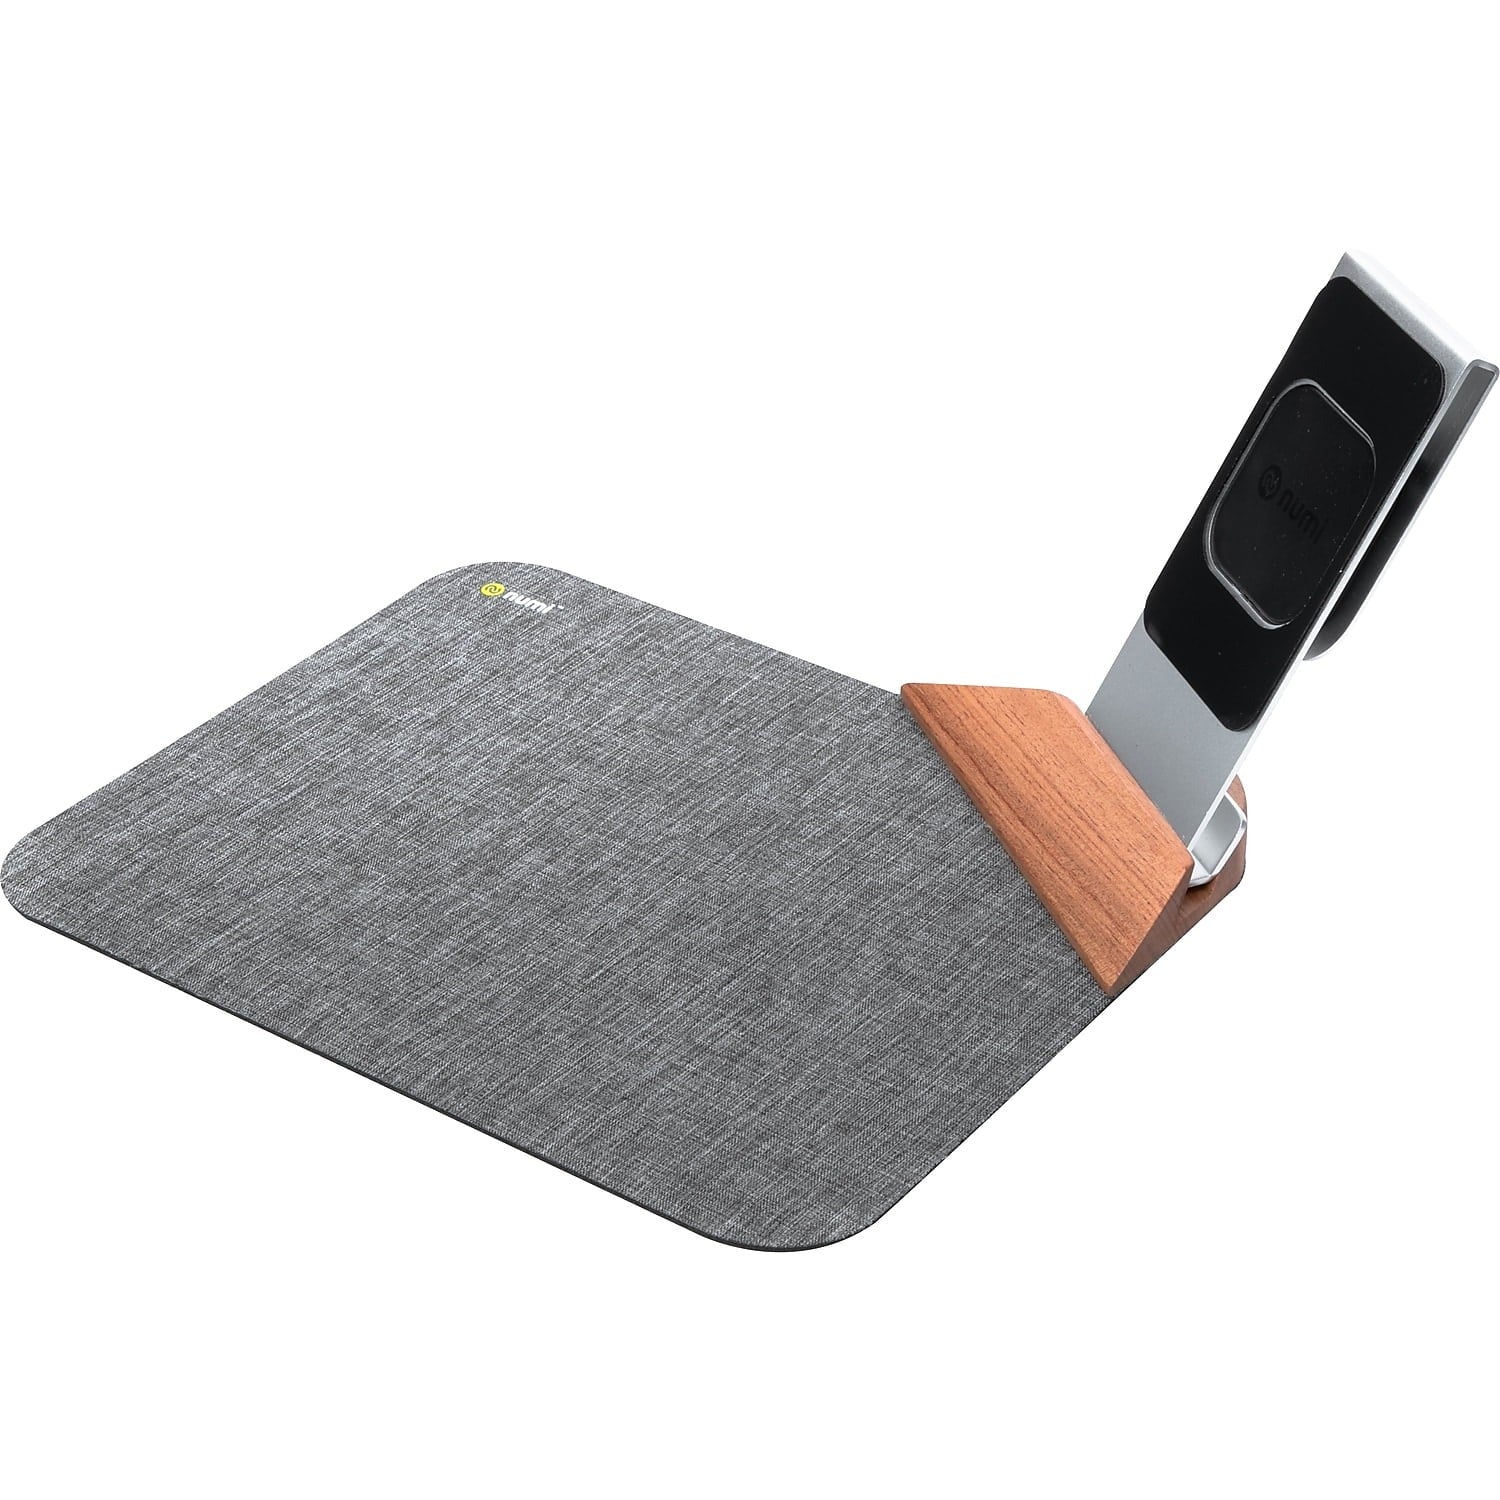 Numi Power Mat Charging Mouse Pad w/Wireless Phone Charger - Gray (New)